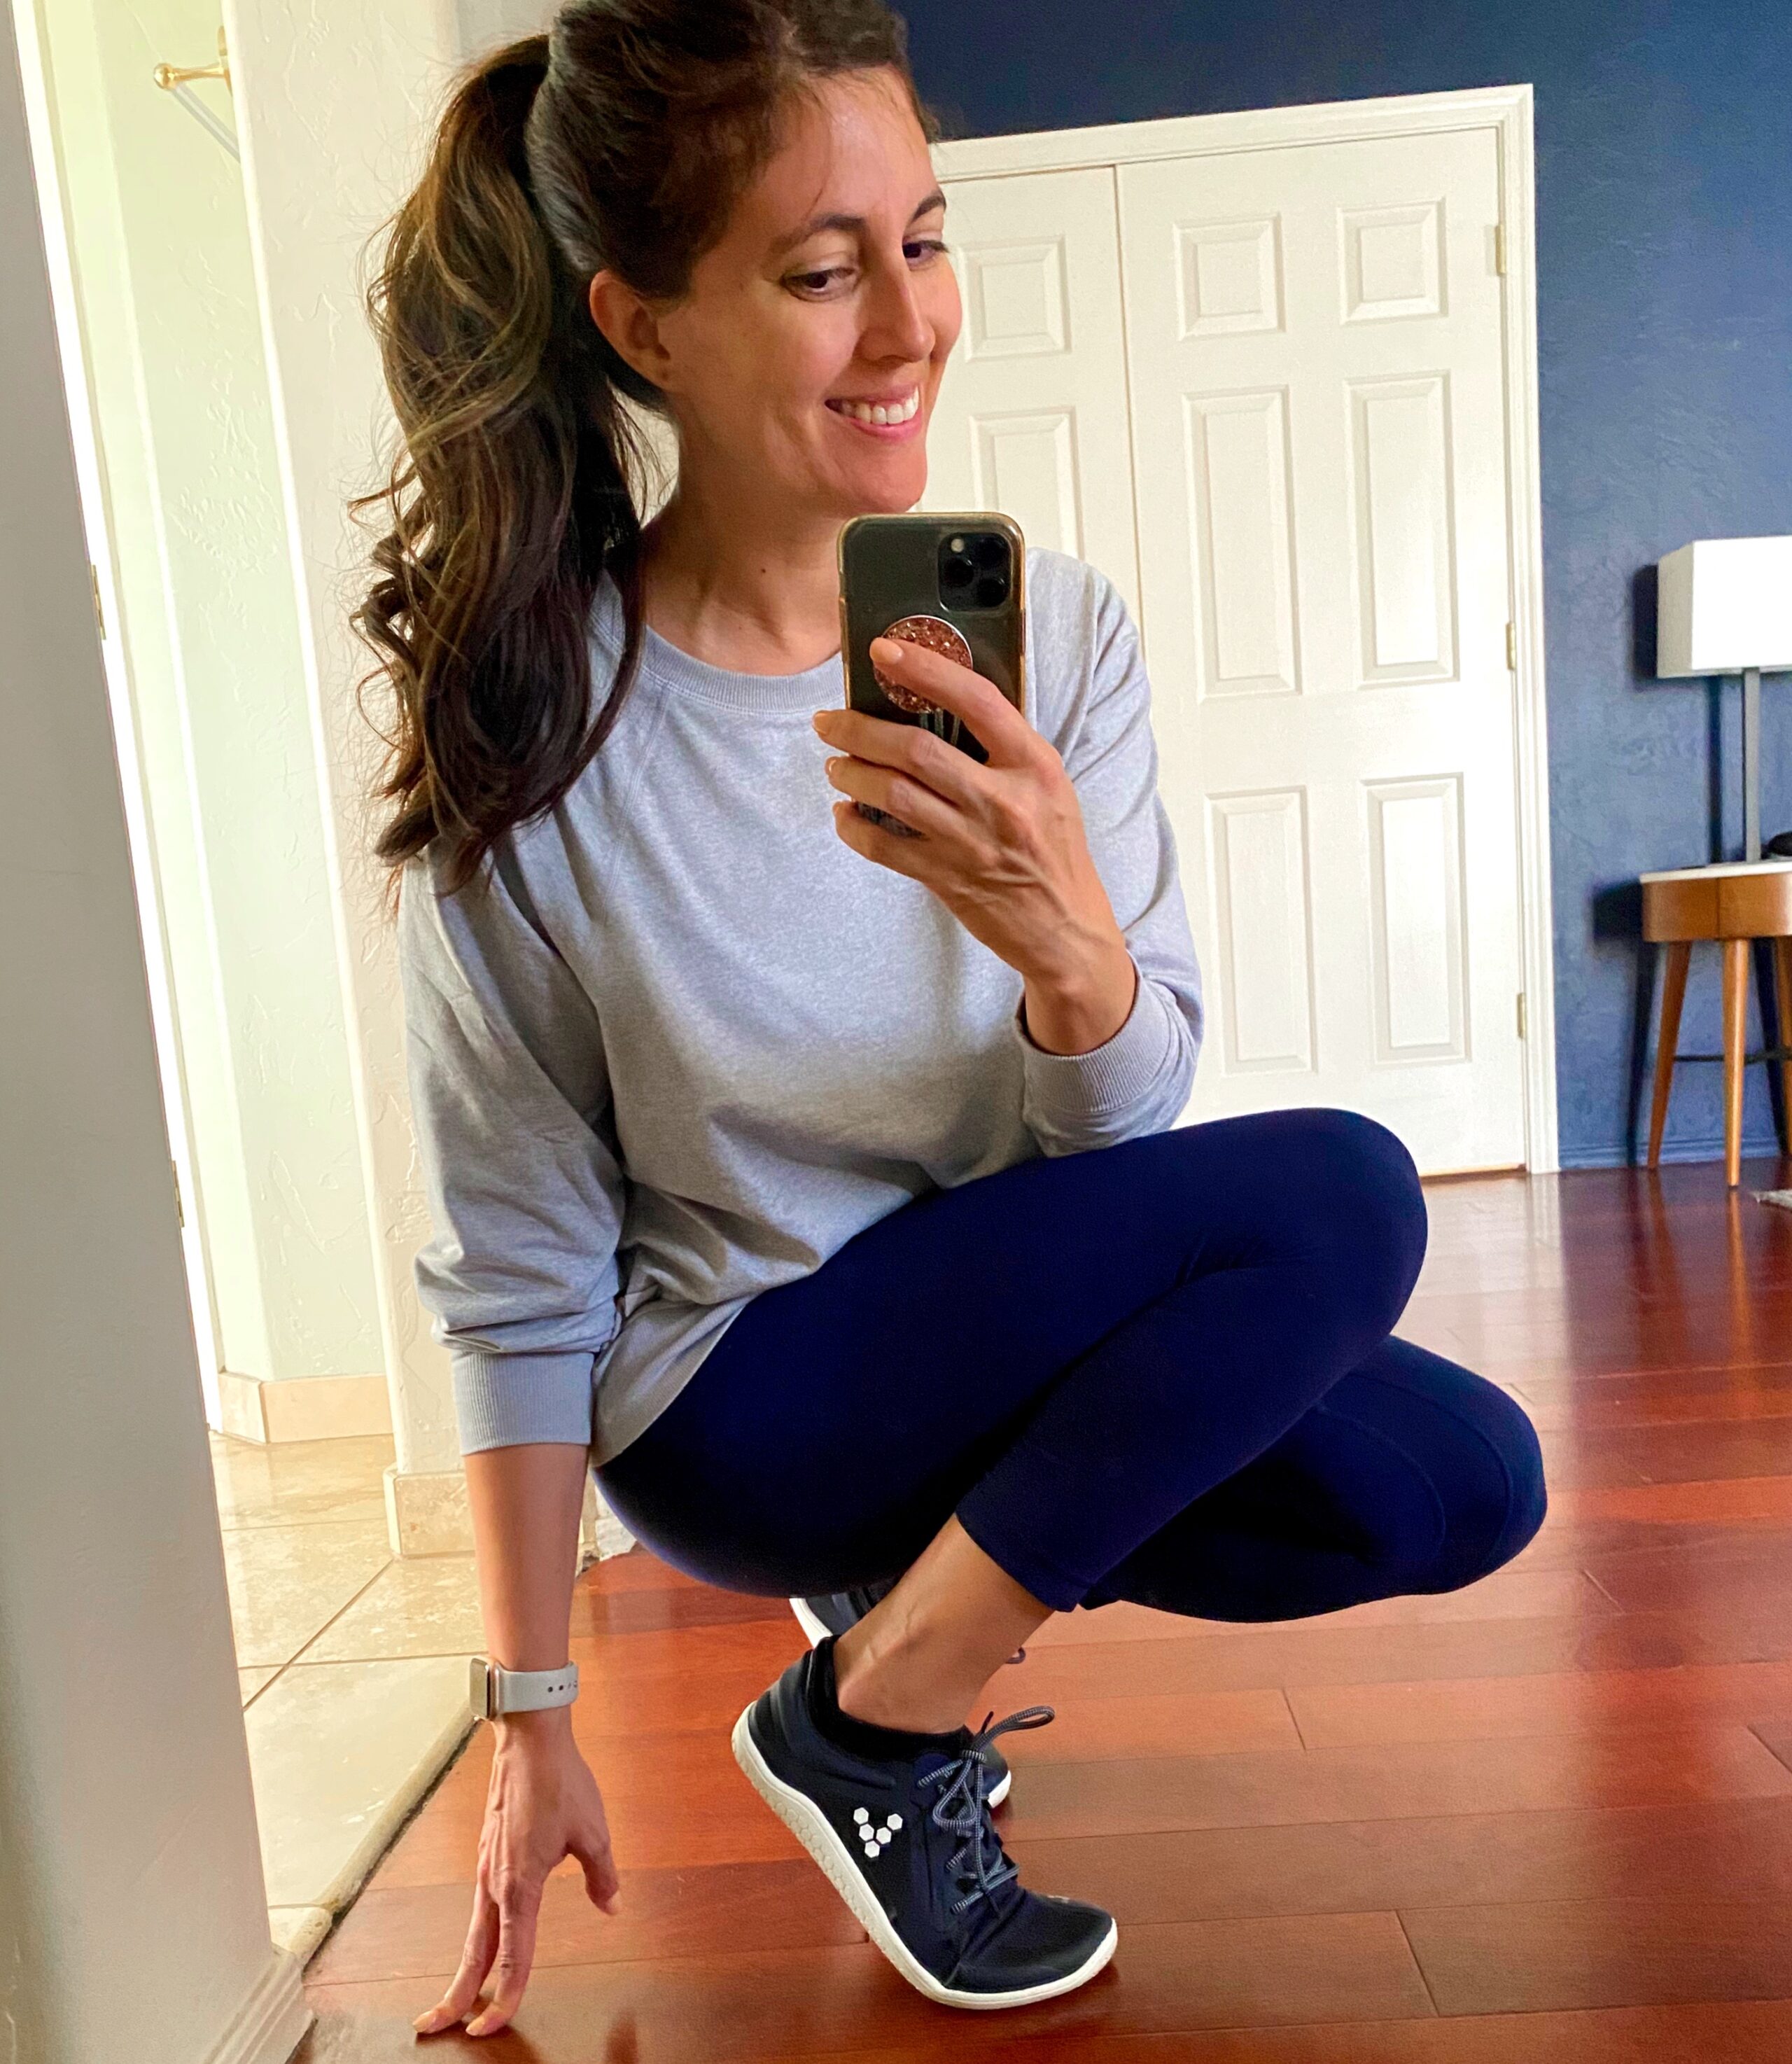 vivo barefoot 1 - Friday Faves - The Fitnessista